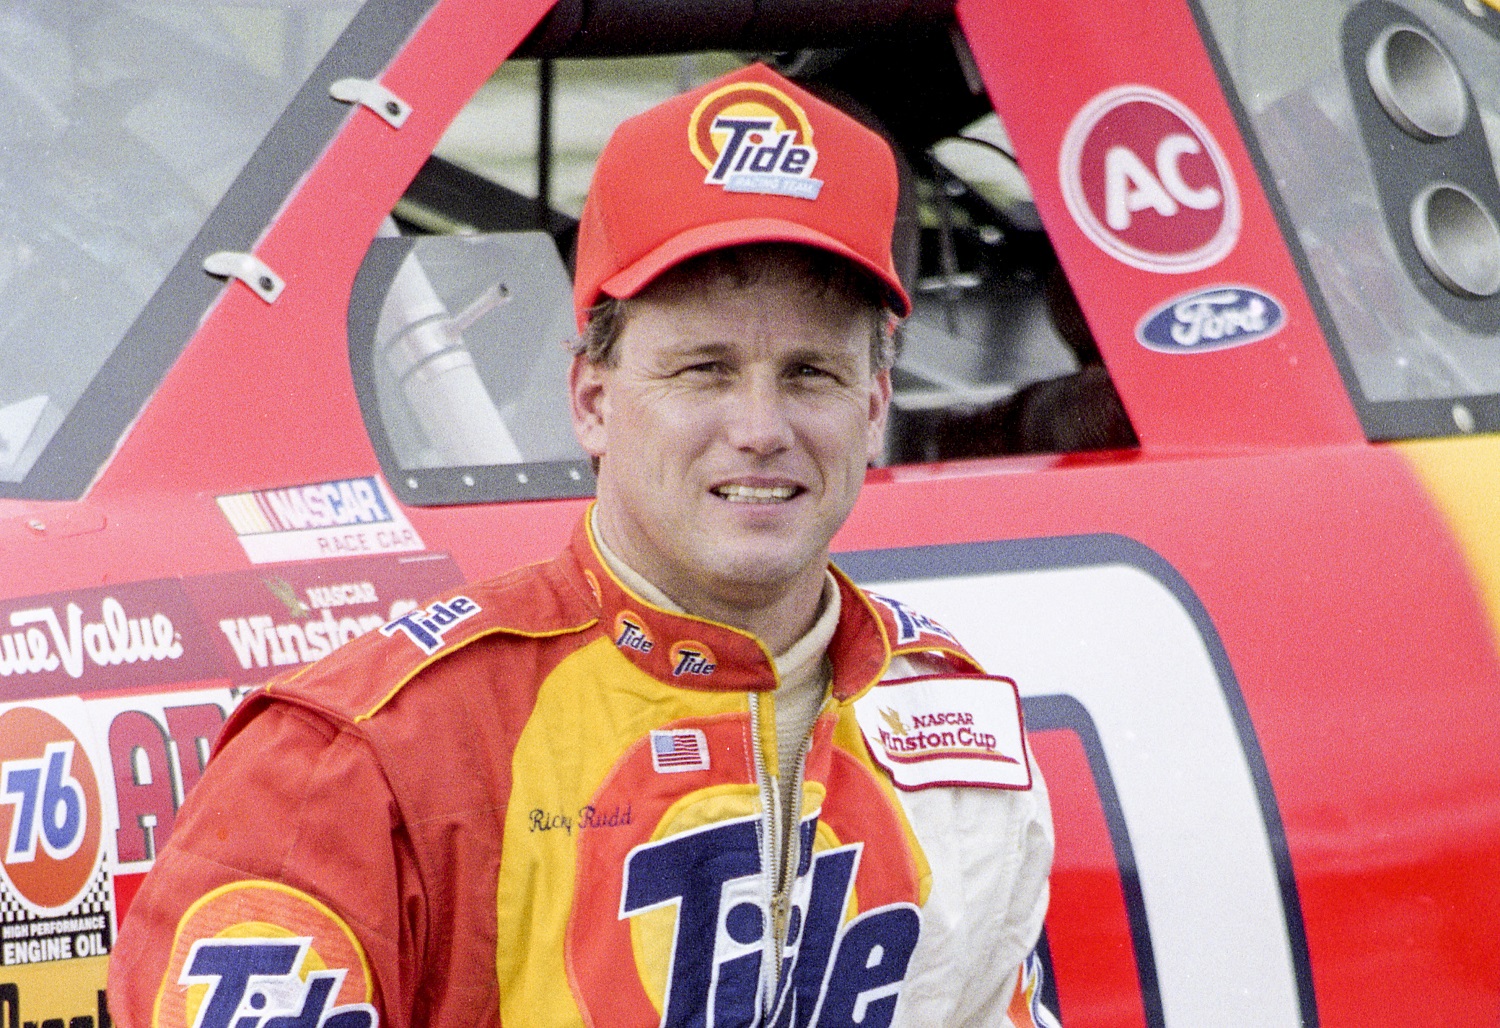 Ricky Rudd poses with his car ahead of the 1994 Daytona 500 to kick off the NASCAR Cup Series season.